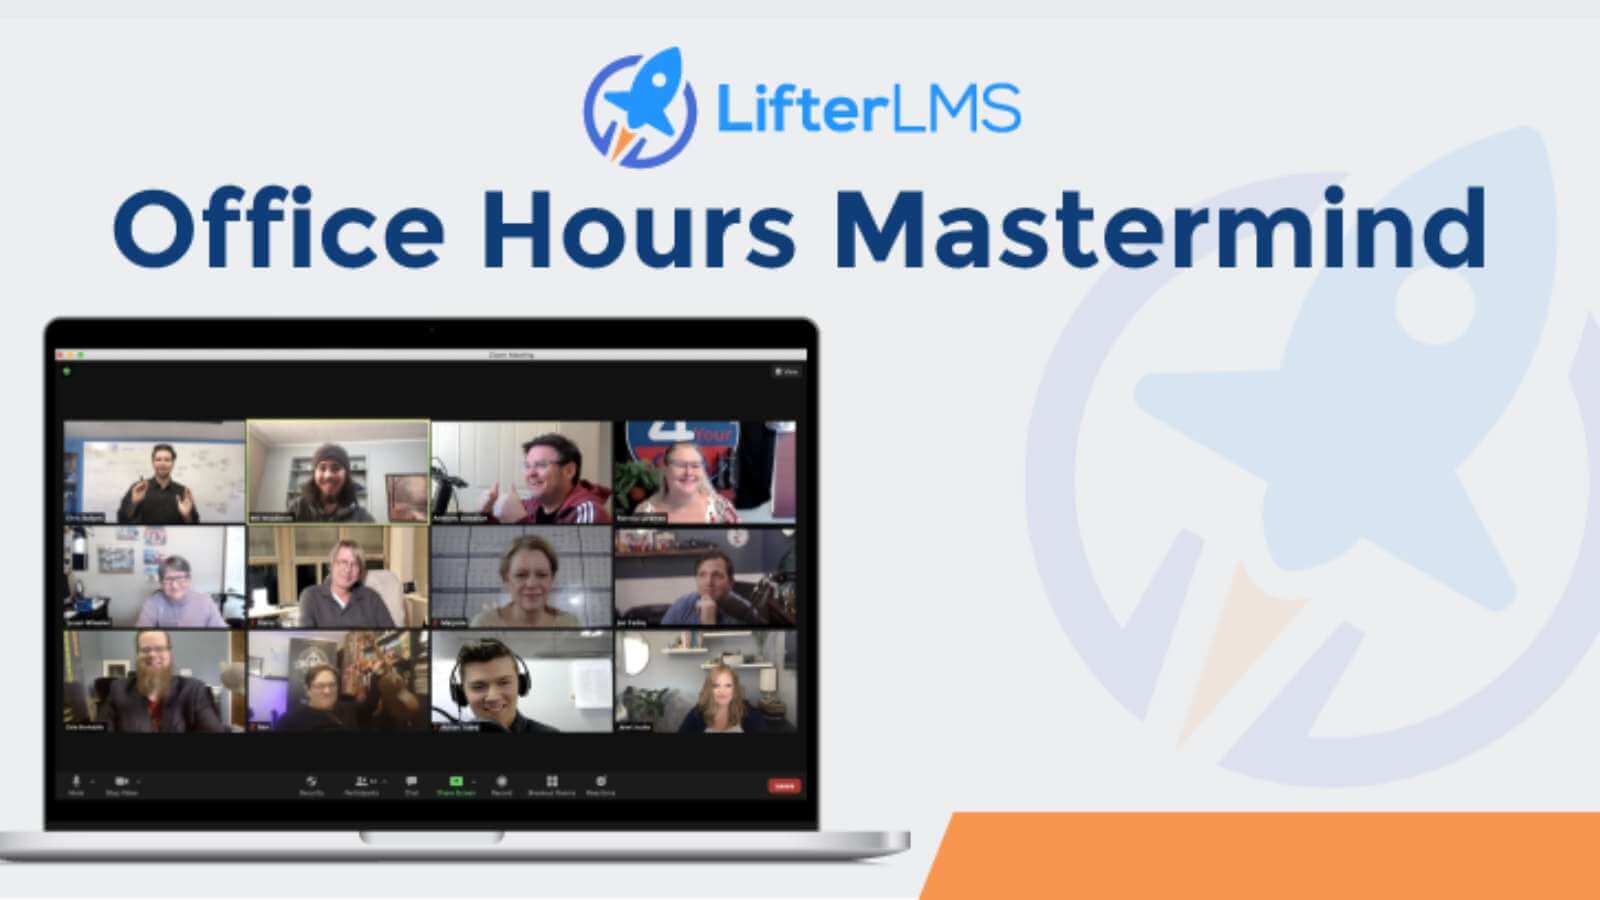 LifterLMS Office Hours Mastermind